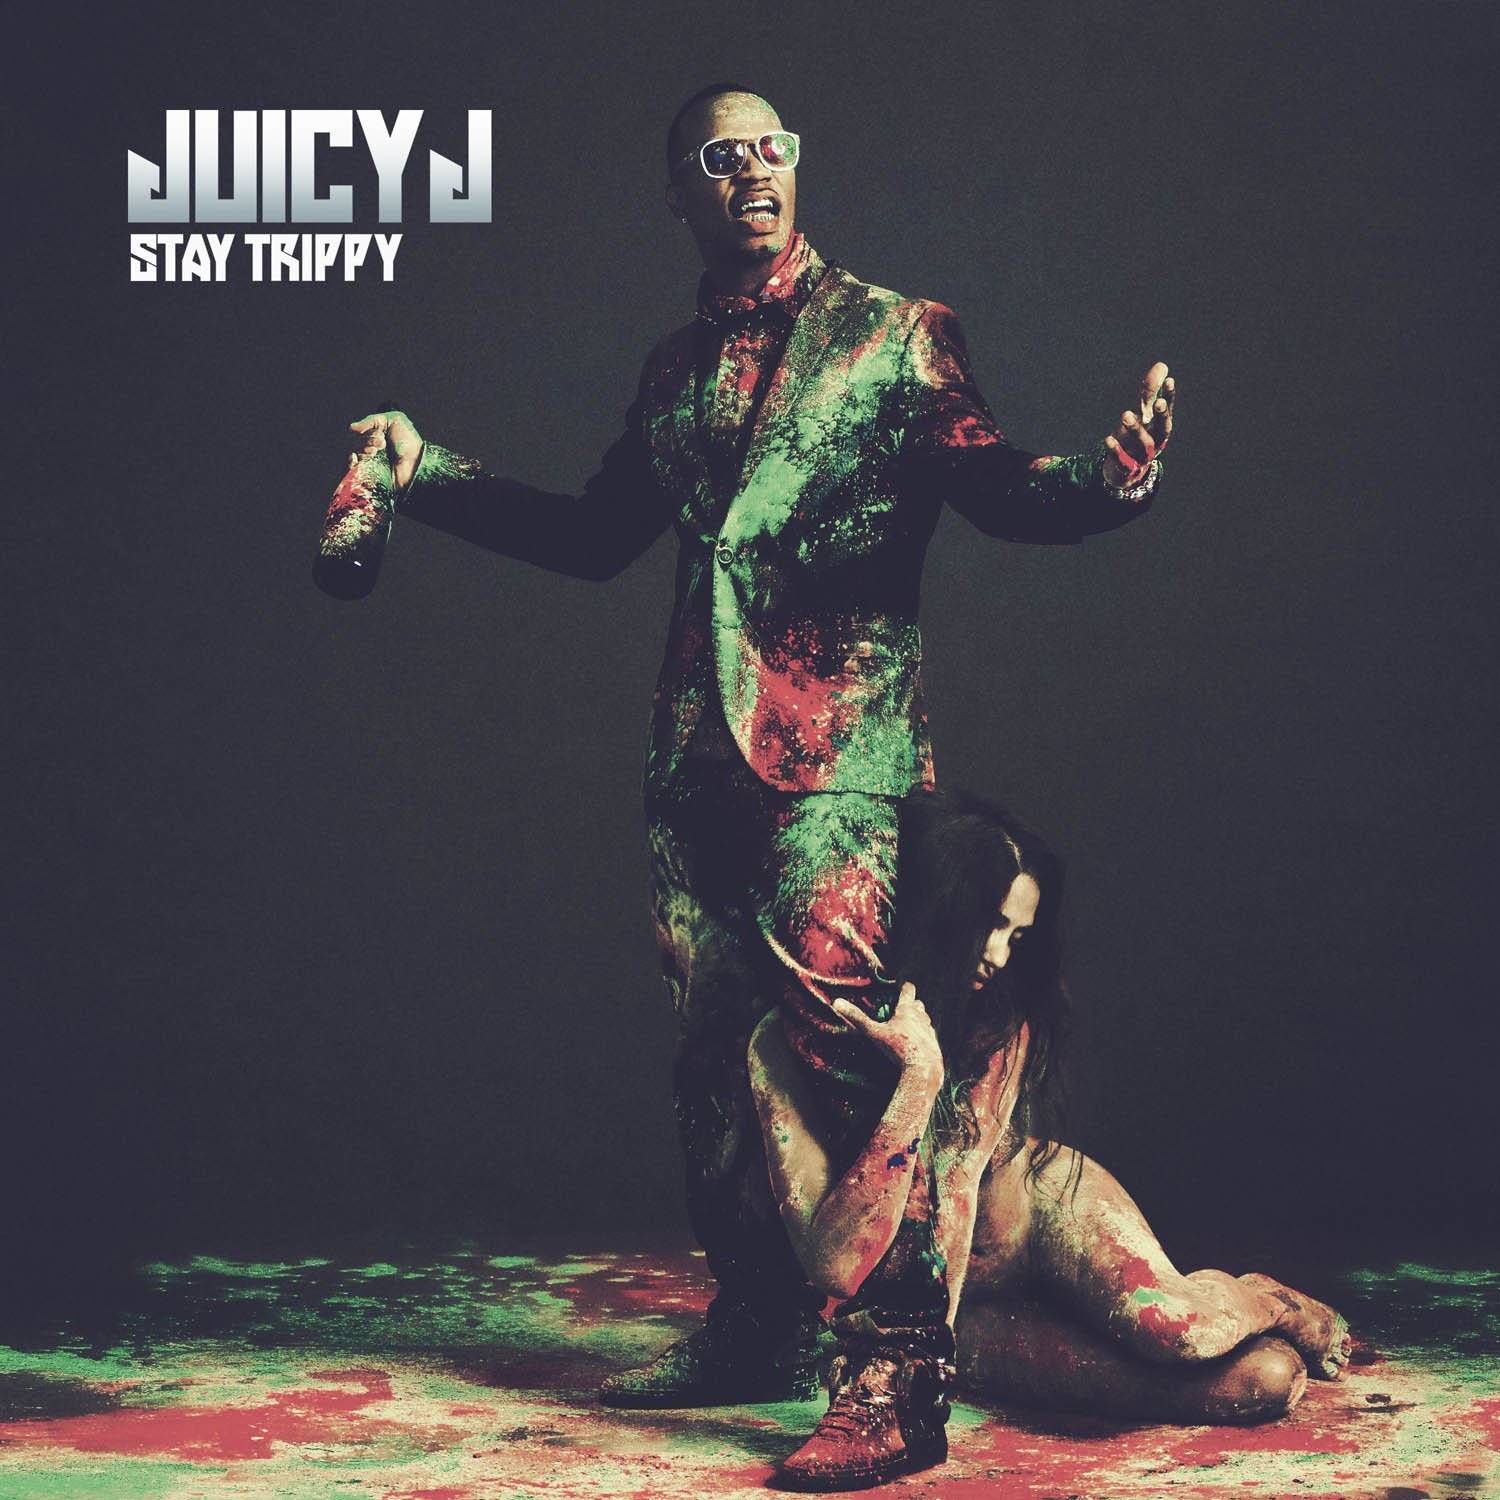 News Added Nov 21, 2012 Stay Trippy is the upcoming third solo studio album by American rapper Juicy J. The album is set to be released on August 27, 2013, under Taylor Gang Records, Kemosabe Records and Columbia Records. The album is Juicy J's first solo album since distancing himself from Three 6 Mafia and […]